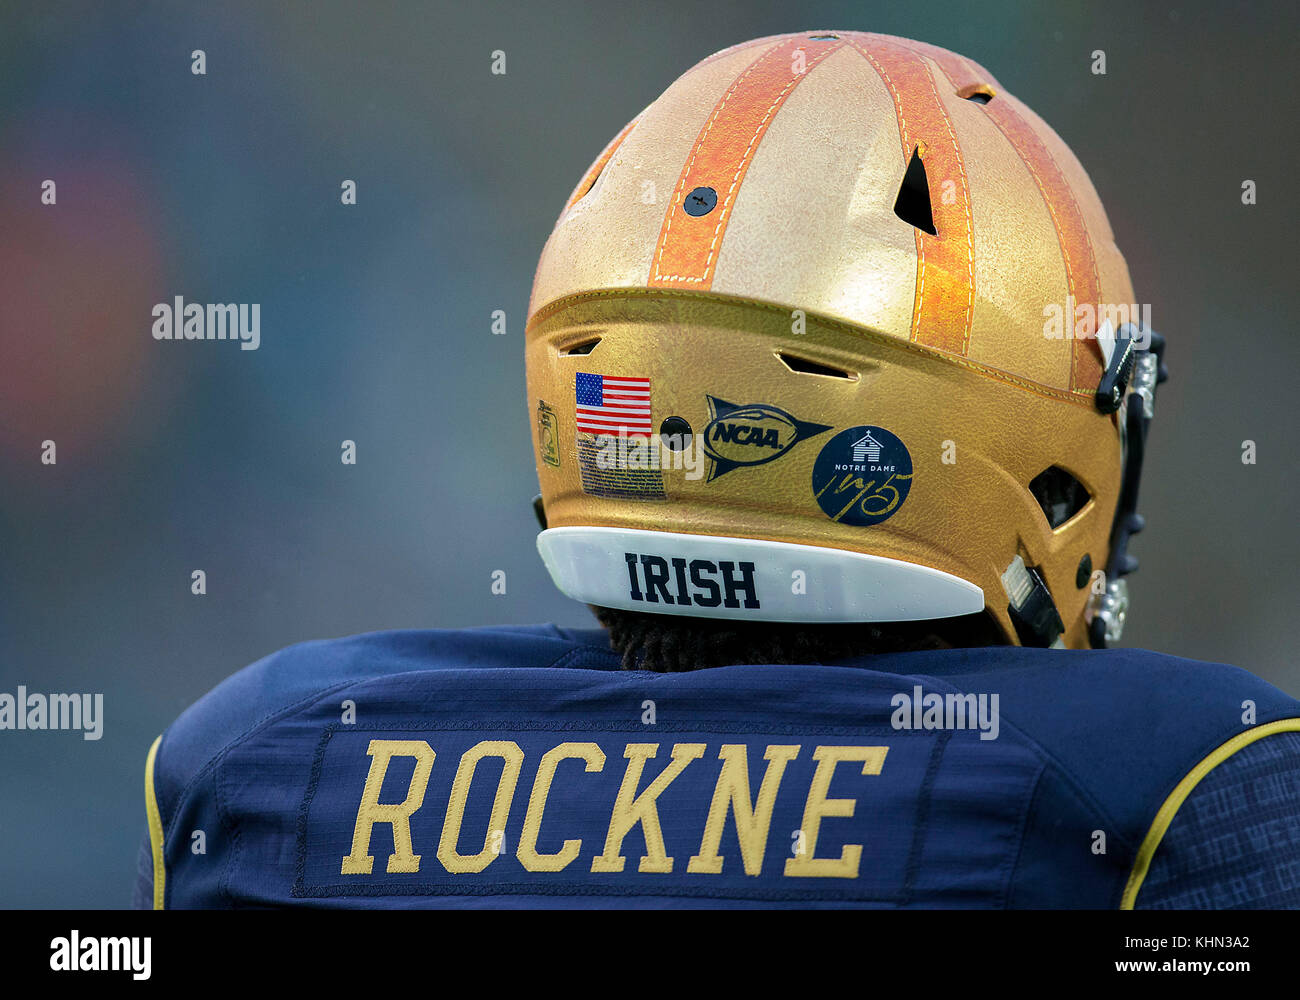 notre dame throwback jersey